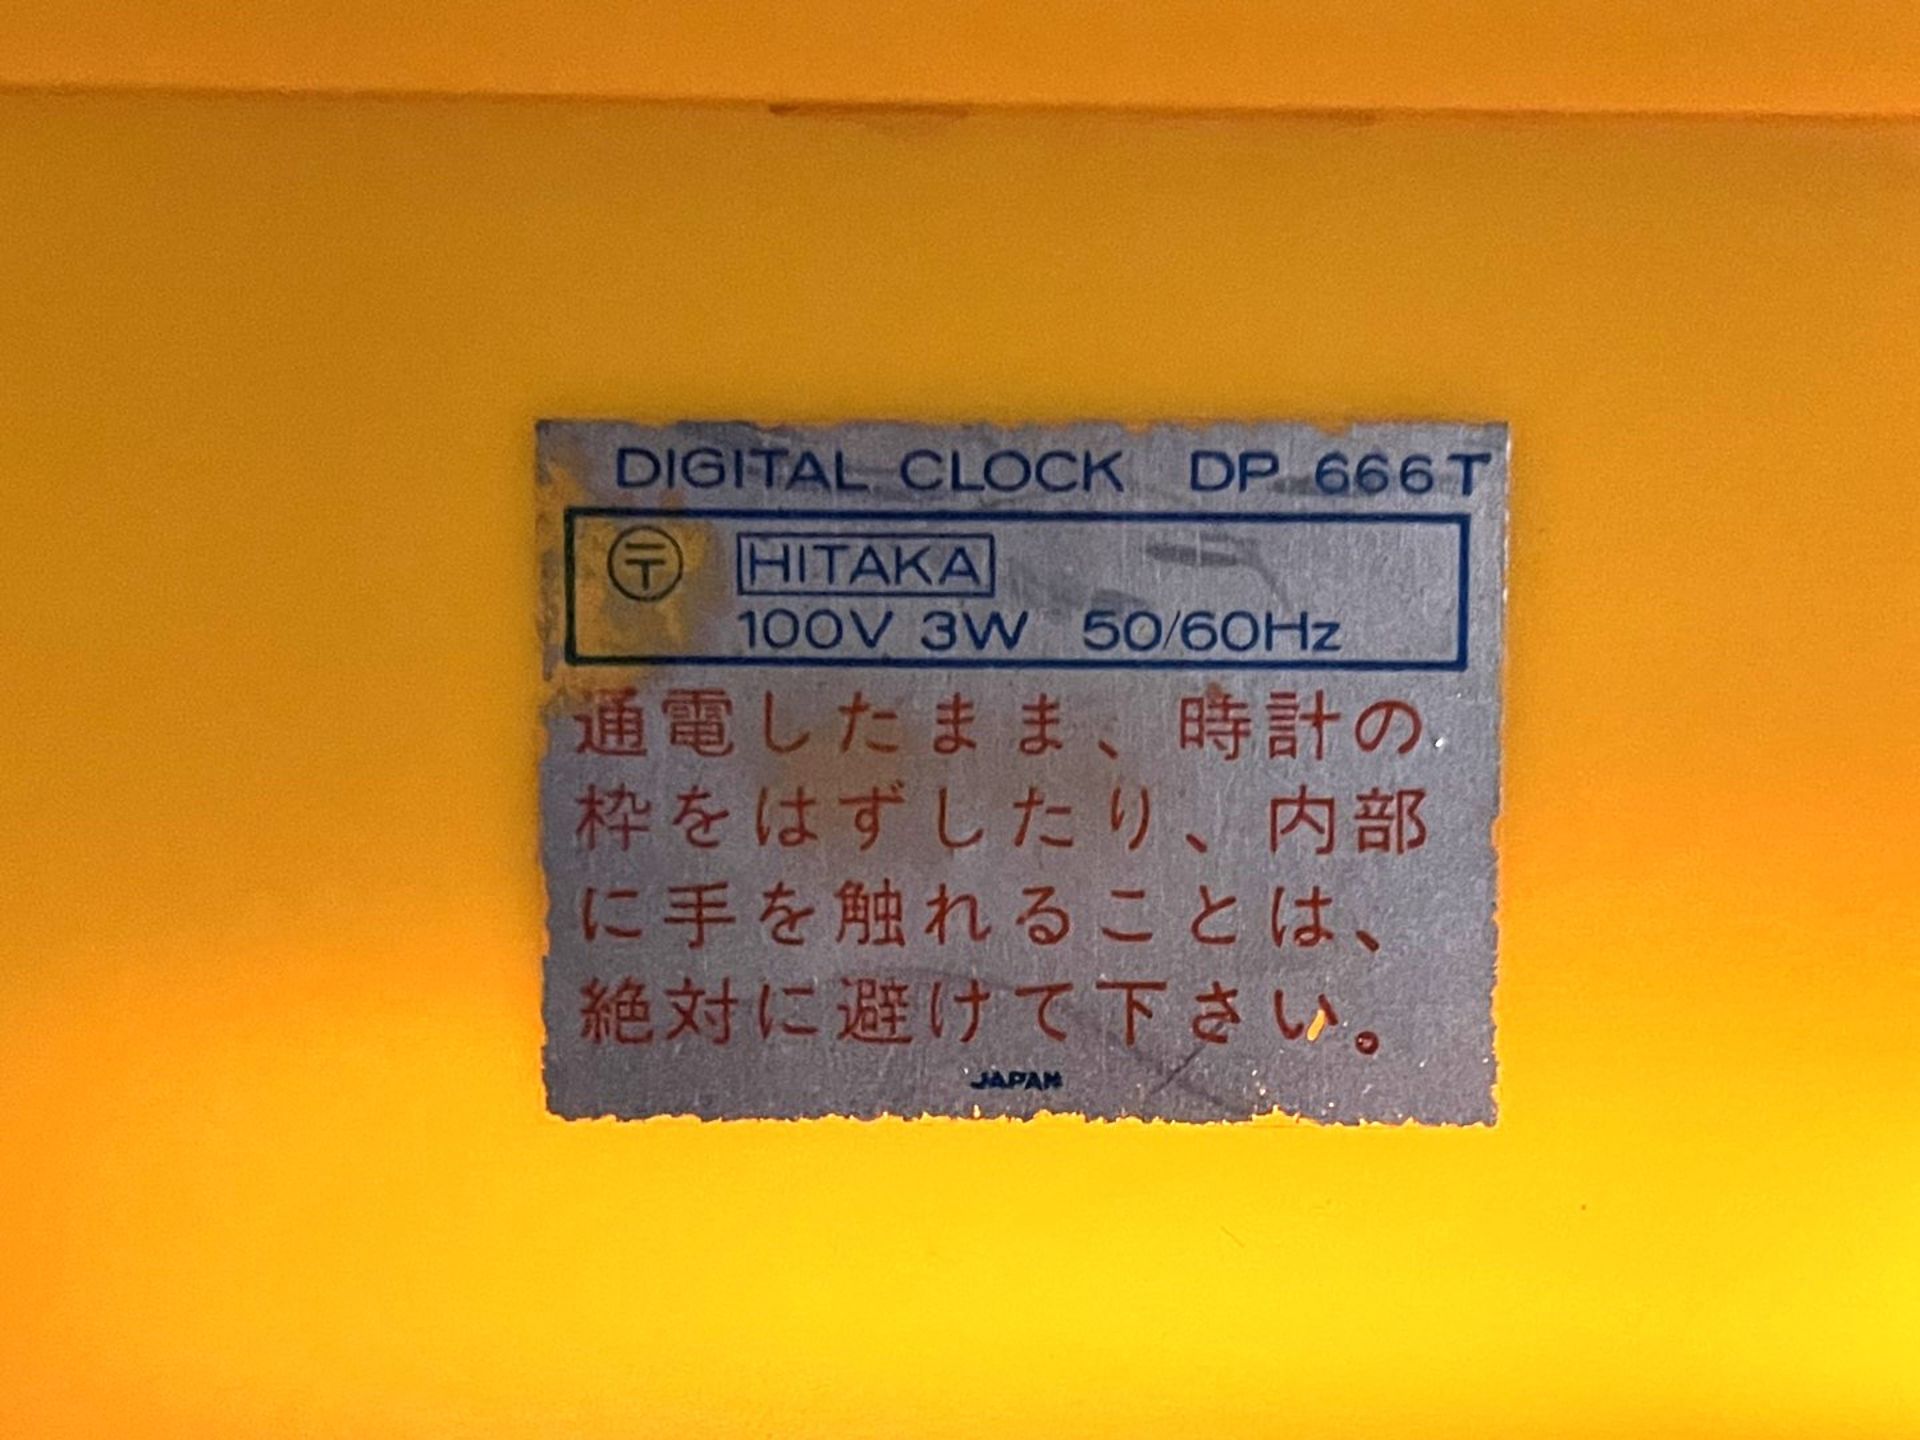 1 x Vintage Japanese Seiko DP666T Digital Flip Alarm Clock With a Yellow Body - Image 4 of 5